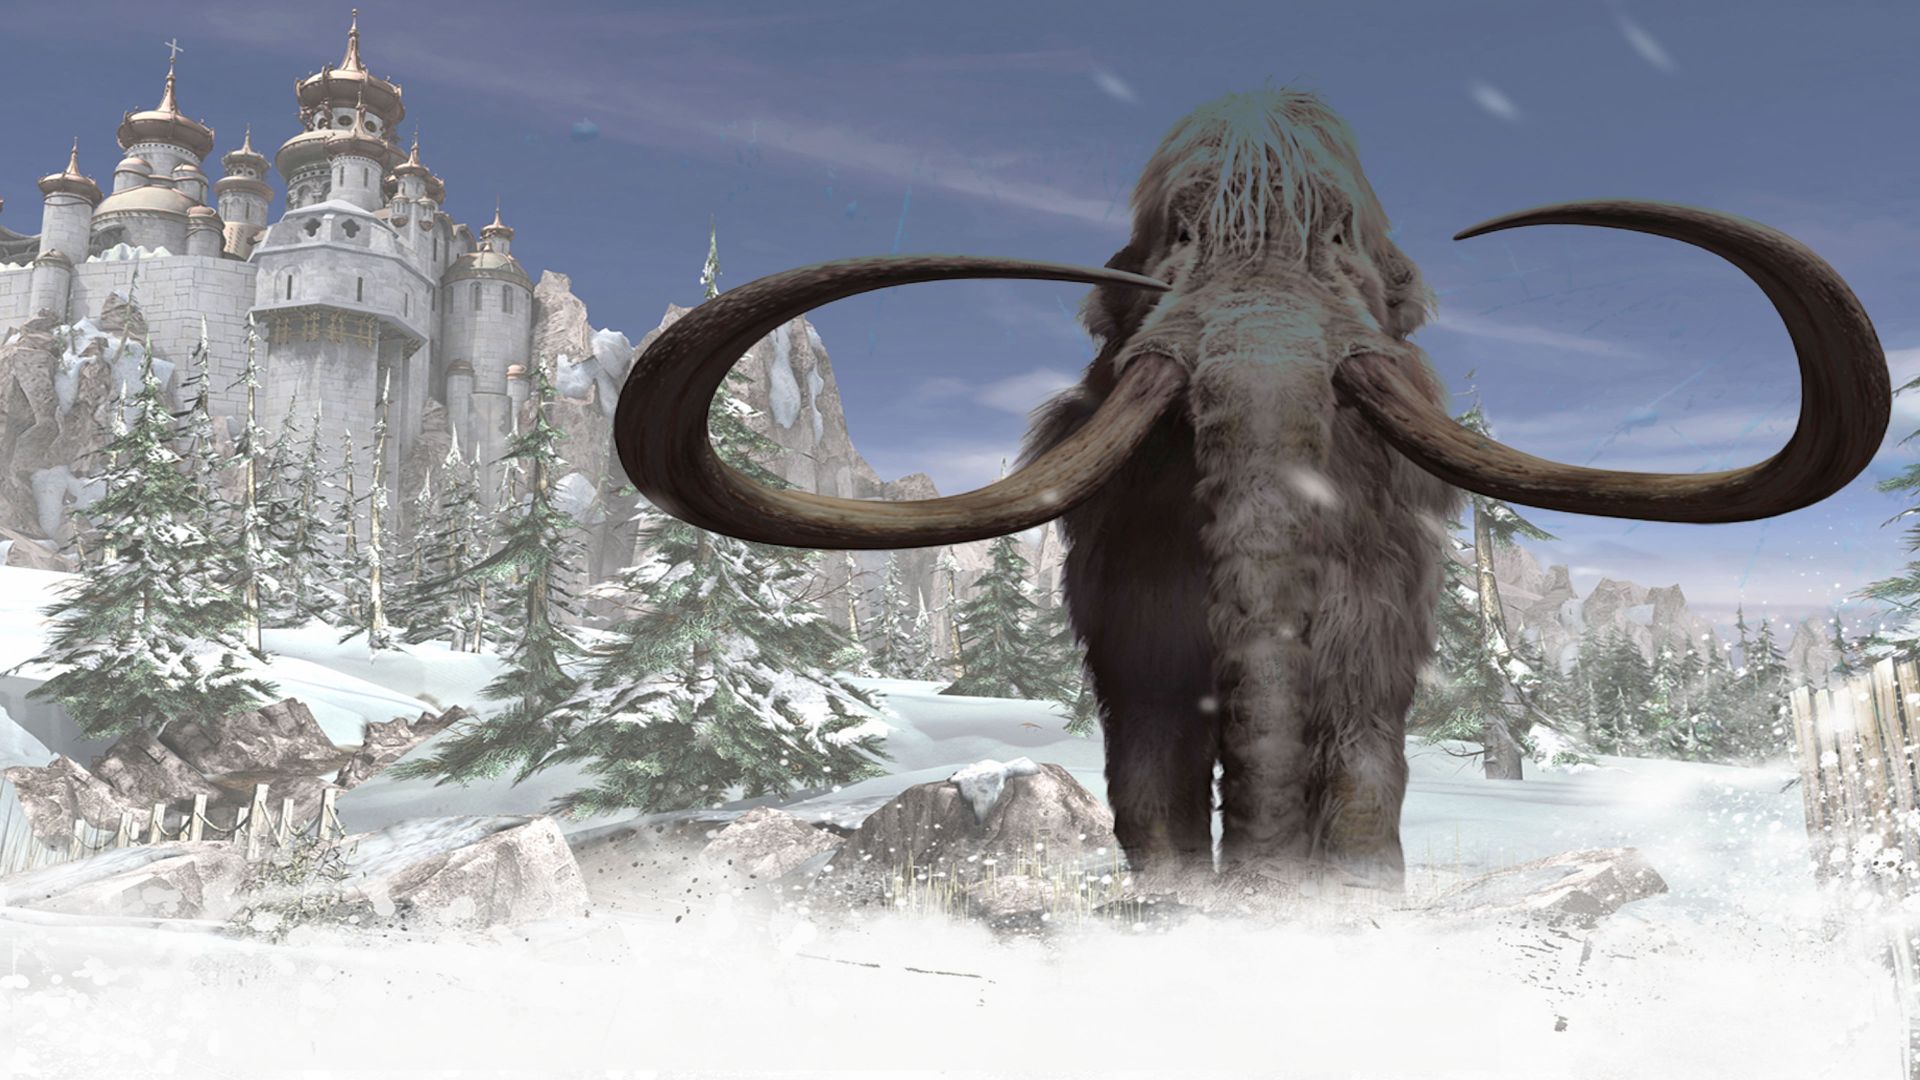 Syberia II technical specifications for laptop